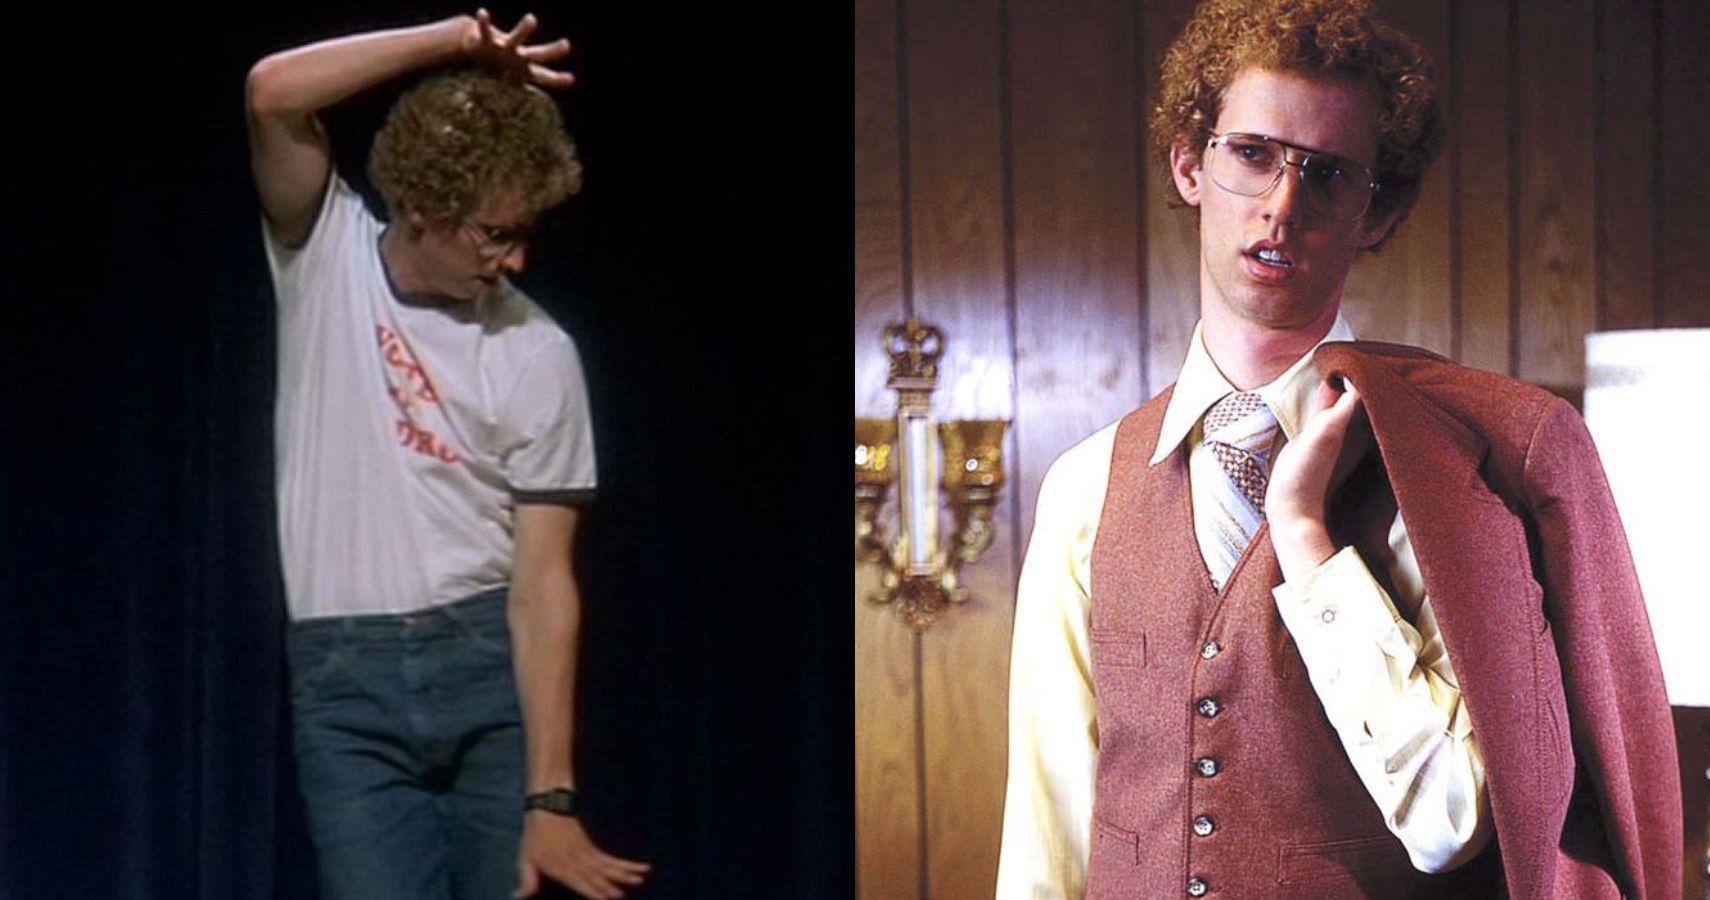 10 Hilarious Napoleon Dynamite Memes That Ll Make You Want To